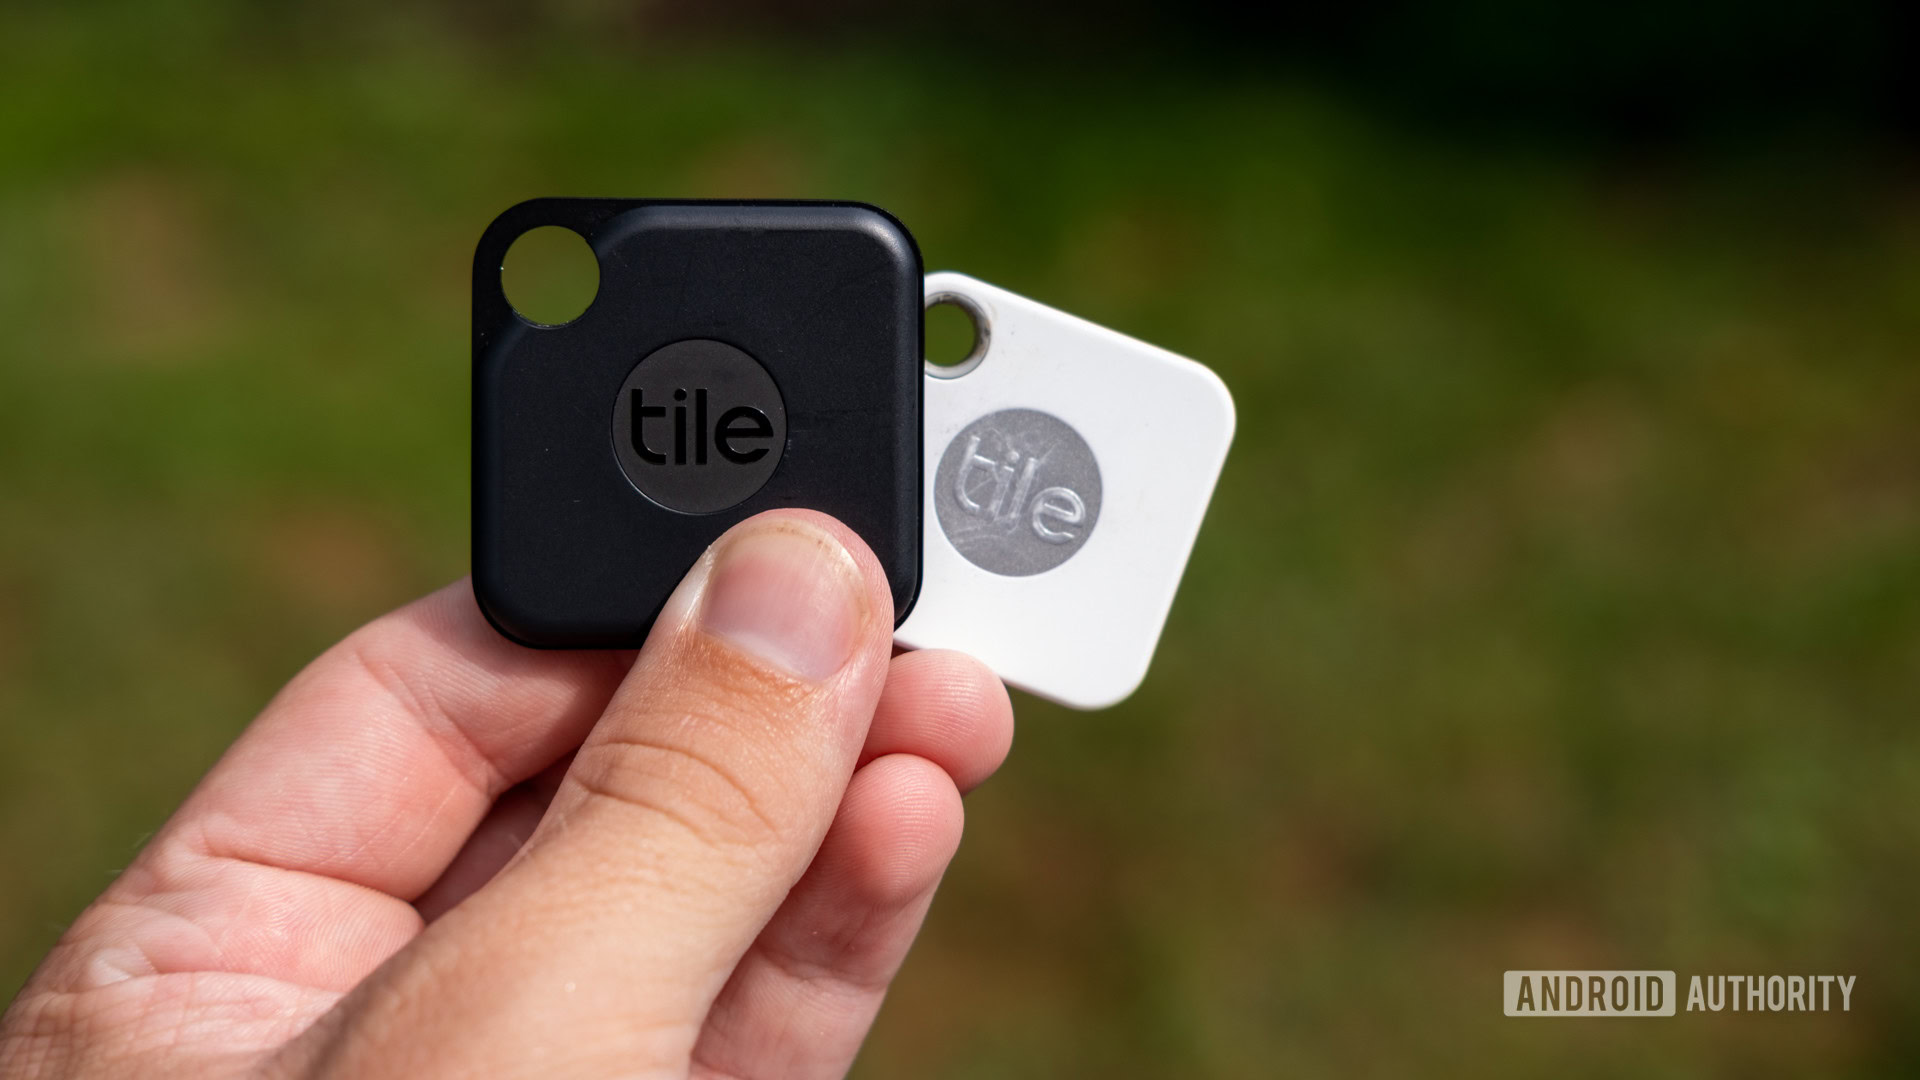 Tile Pro 2022 4-Pack. Powerful Bluetooth Tracker, Keys Finder and